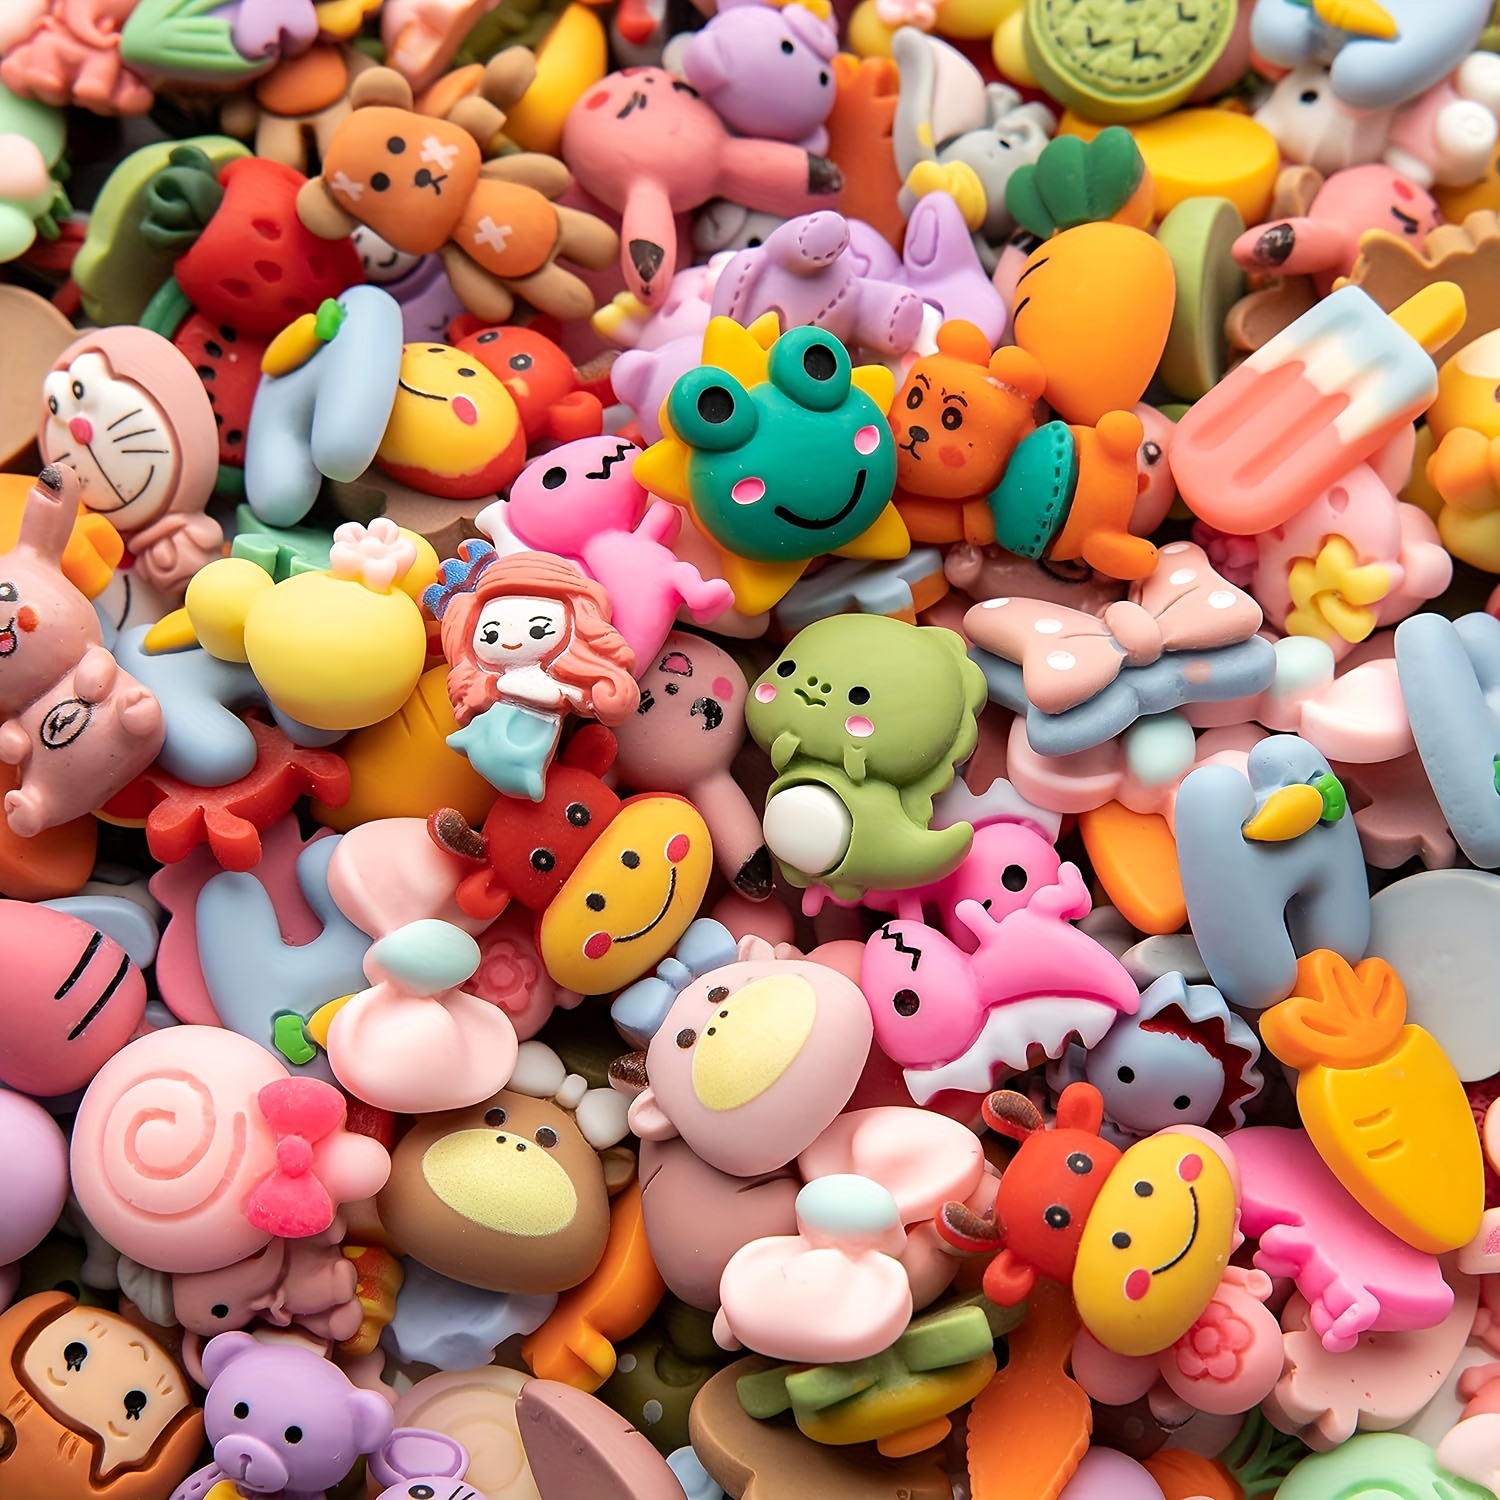 Slime Charms Cartoons Charms Cute Set - Mixed Lot Assorted Cartoons Kawaii  Charms Resin Flatback Cute Sets for DIY Crafts Making Decorations  Scrapbooking Embellishments Hair Clip 80pcs